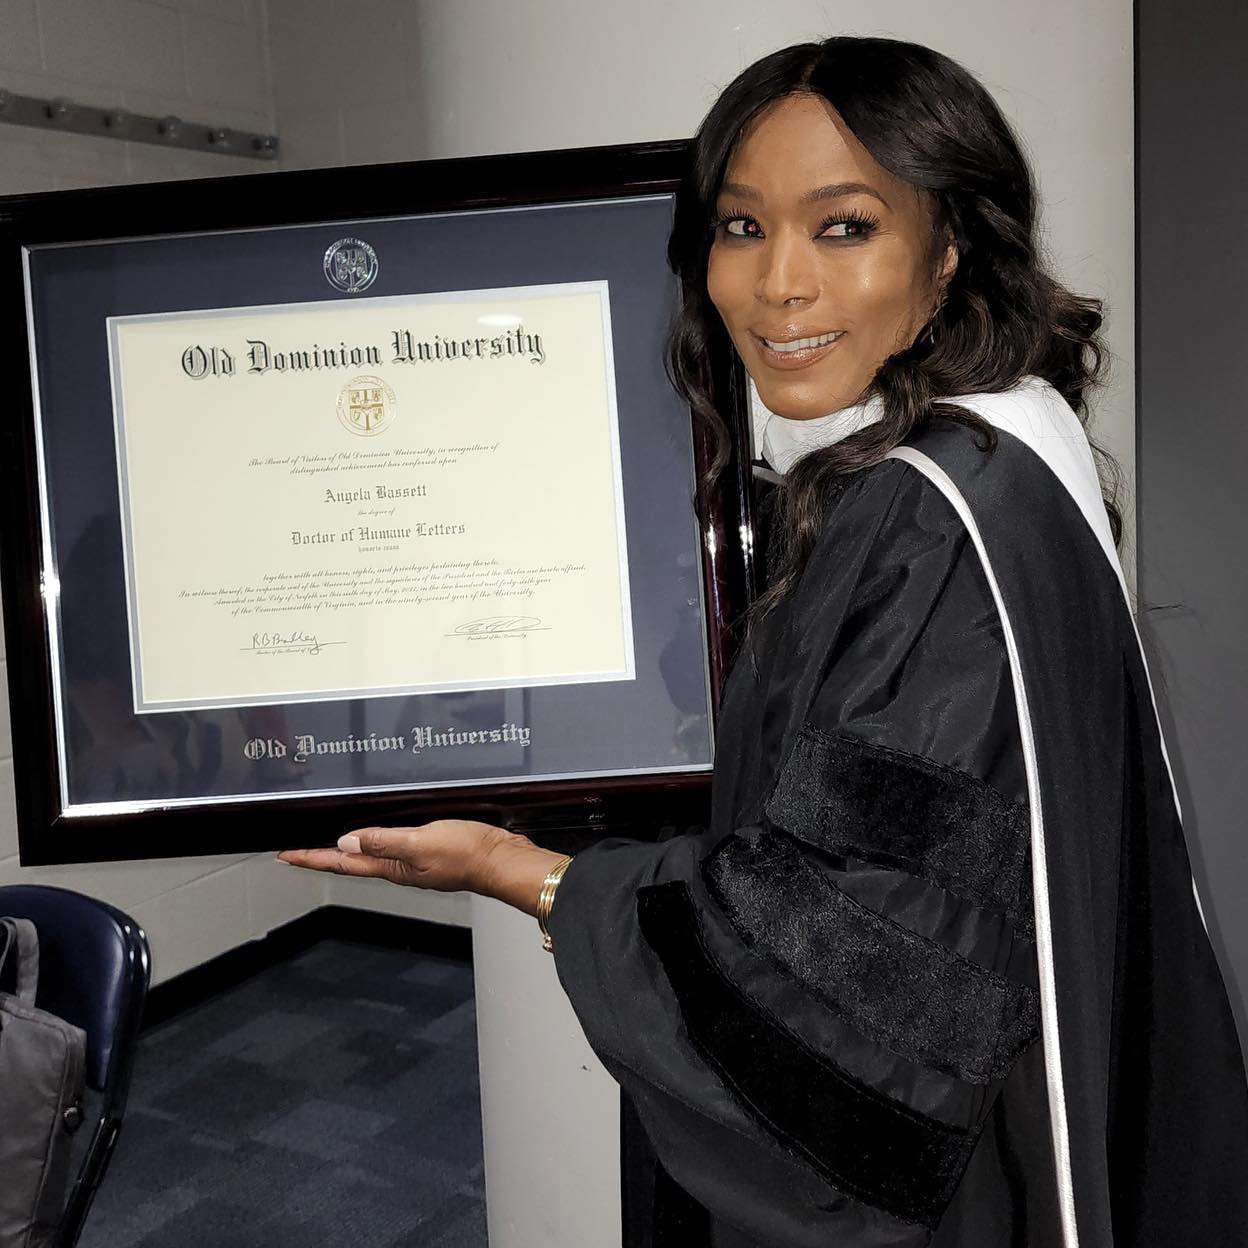 Angela Bassett Receives Honorary Doctorate from Old Dominion University